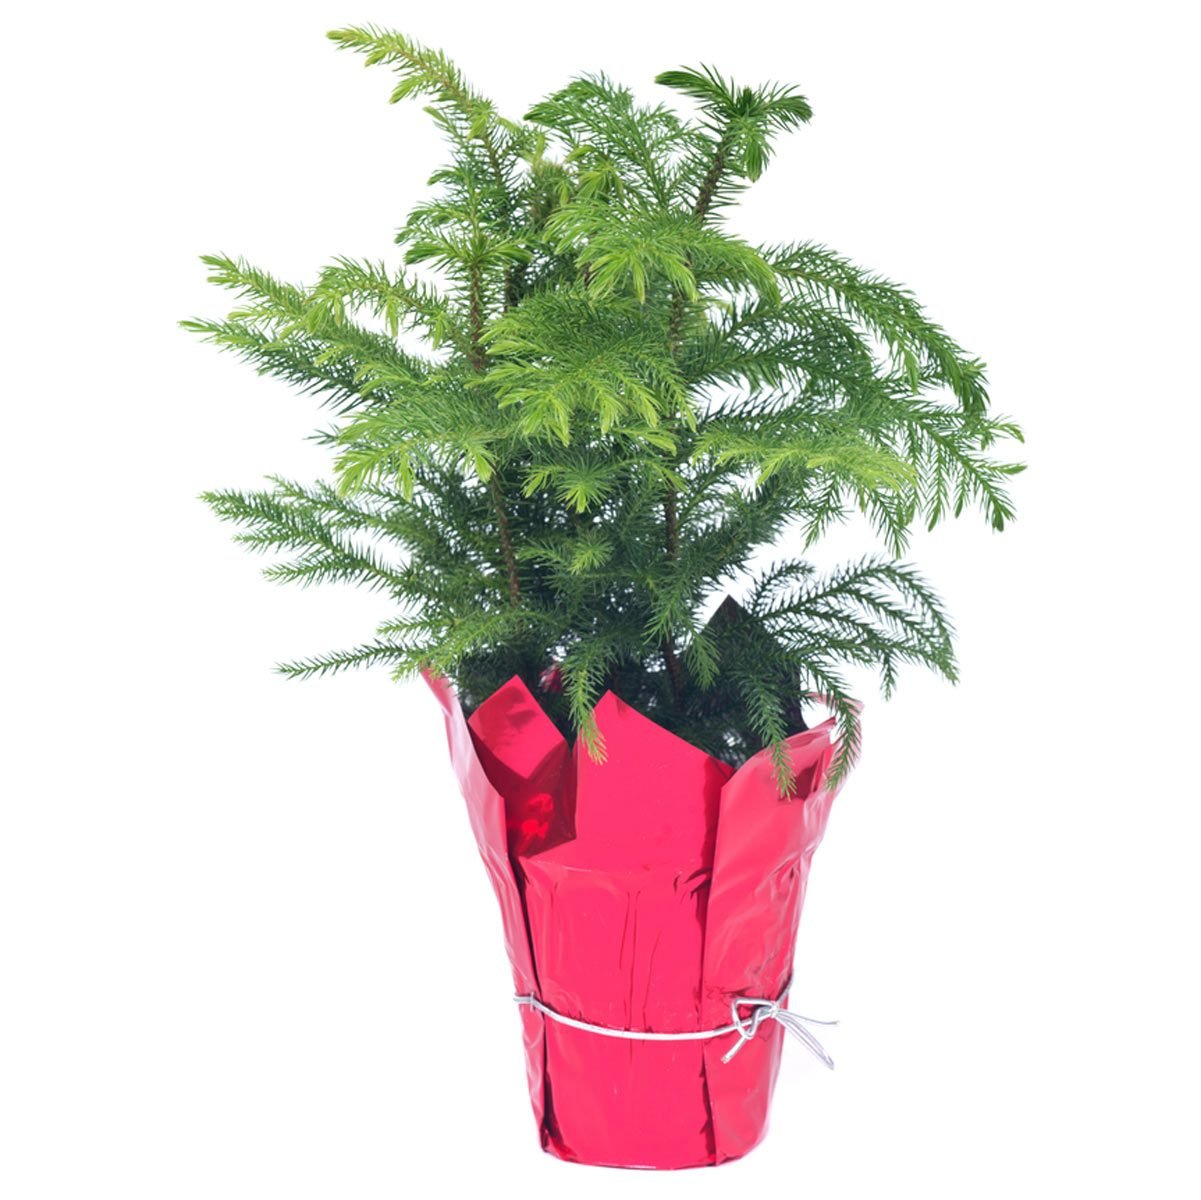 Does A Potted Norfolk Island Pine Make A Good Christmas Tree